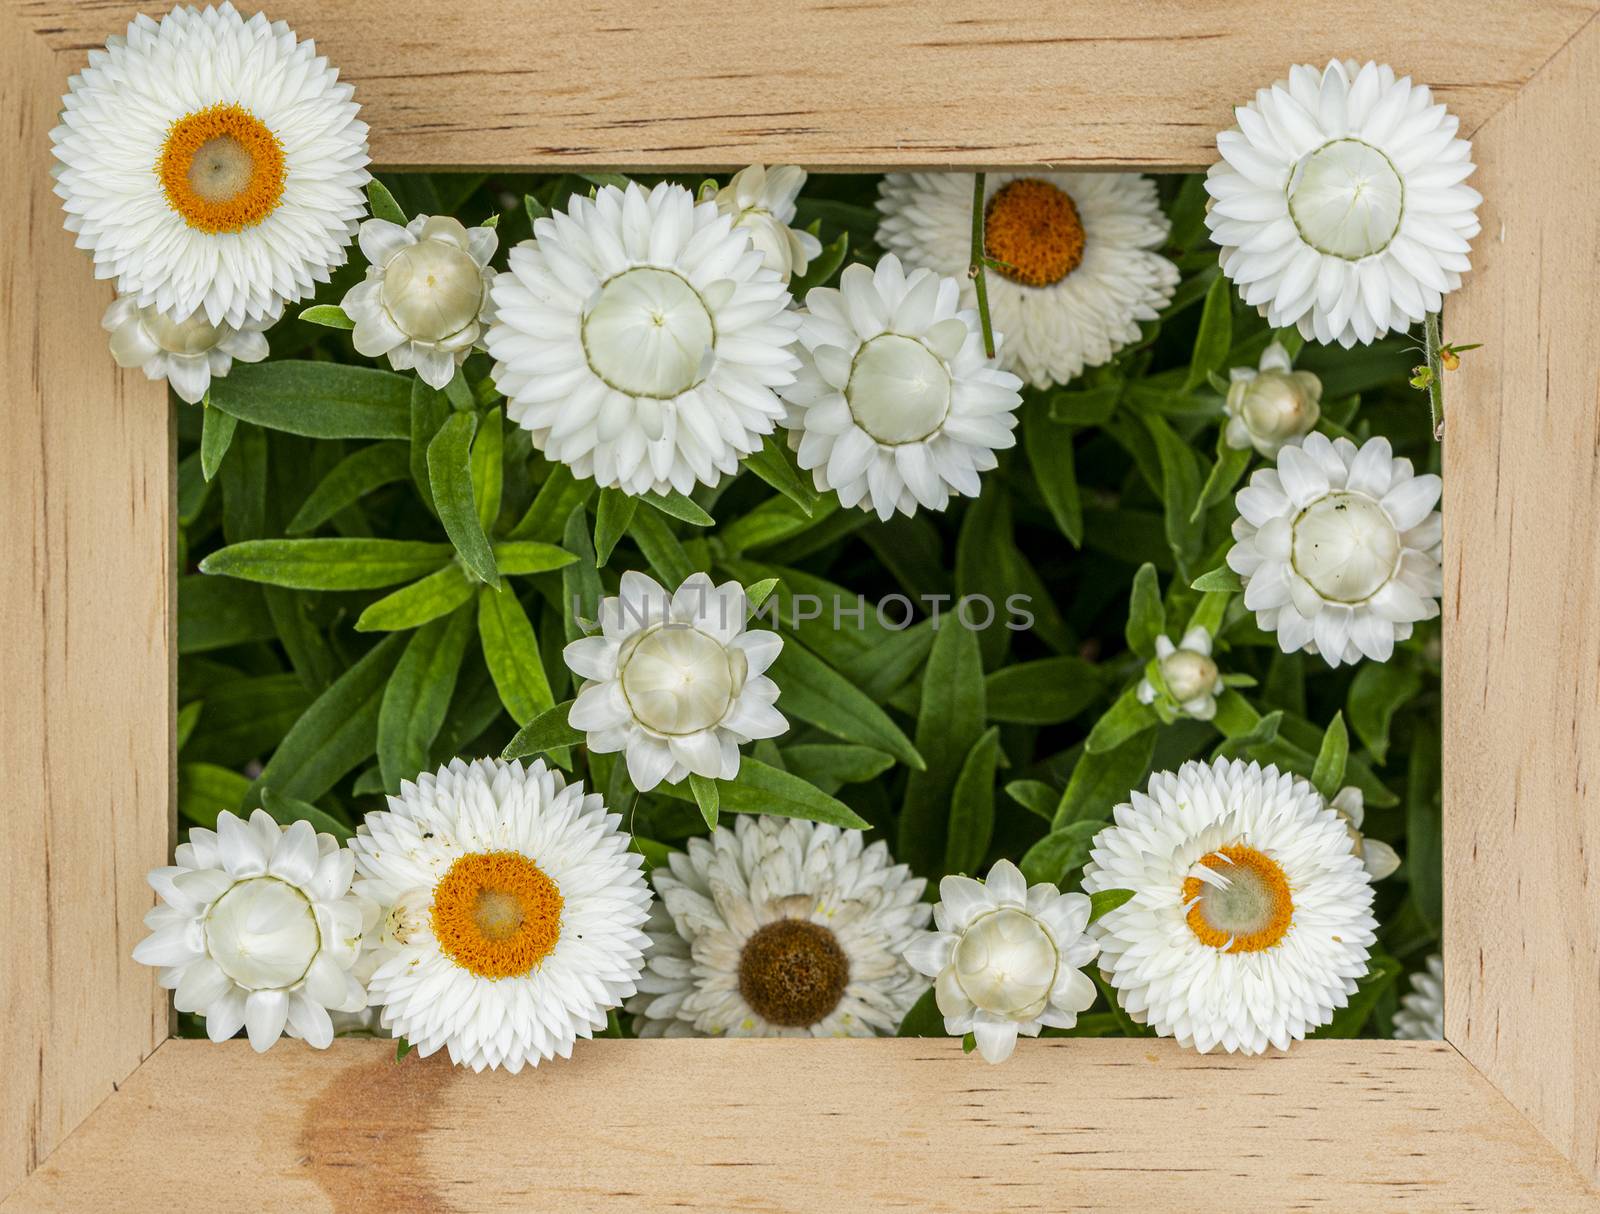 Vibrant, natural  Helichrysum flowers in a wooden frame